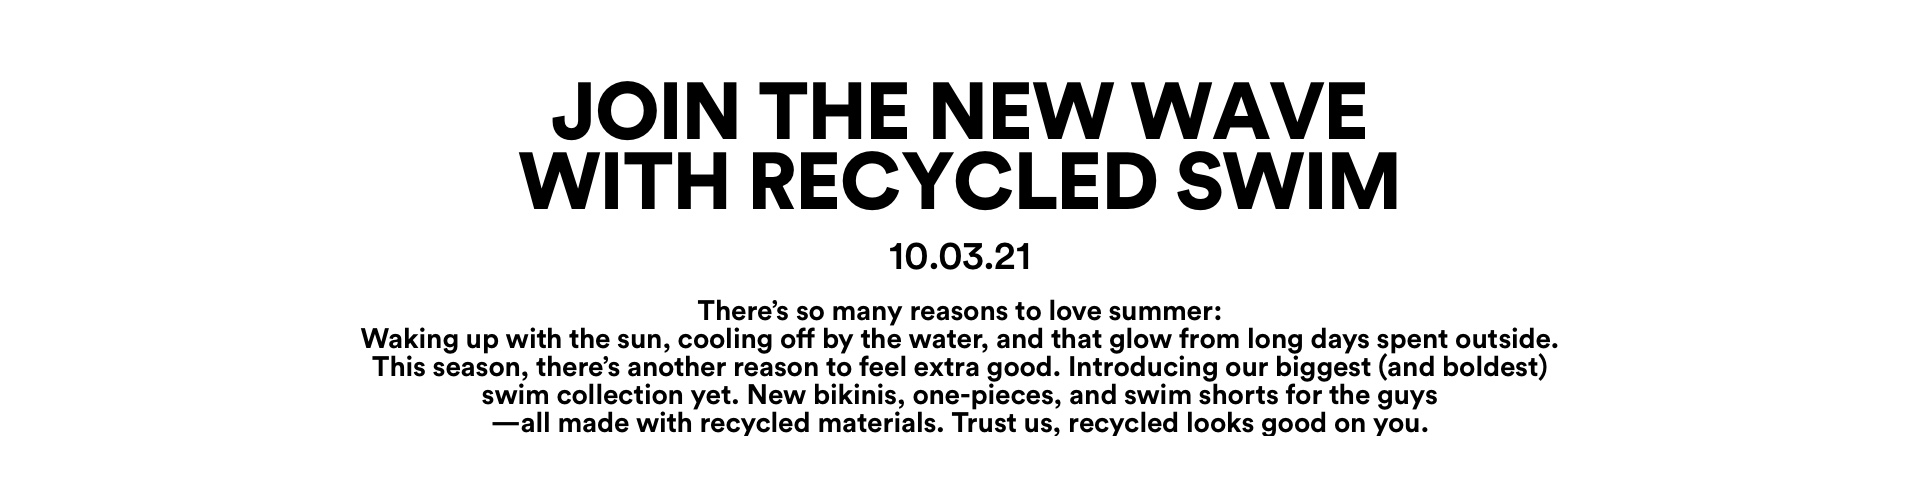 Join the New Wave with Recycled Swim